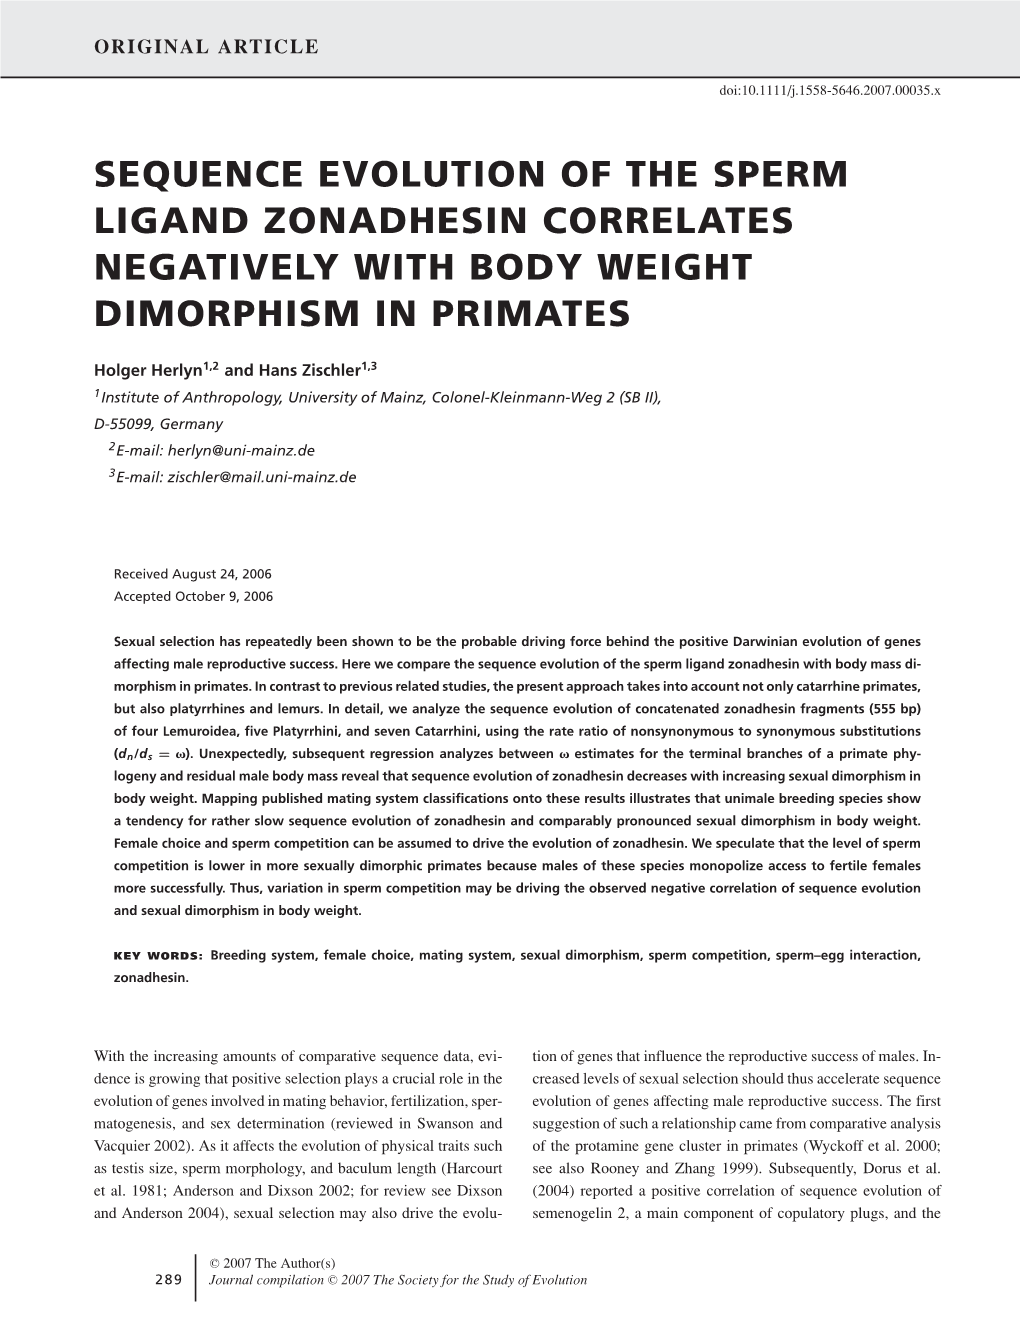 Sequence Evolution of the Sperm Ligand Zonadhesin Correlates Negatively with Body Weight Dimorphism in Primates